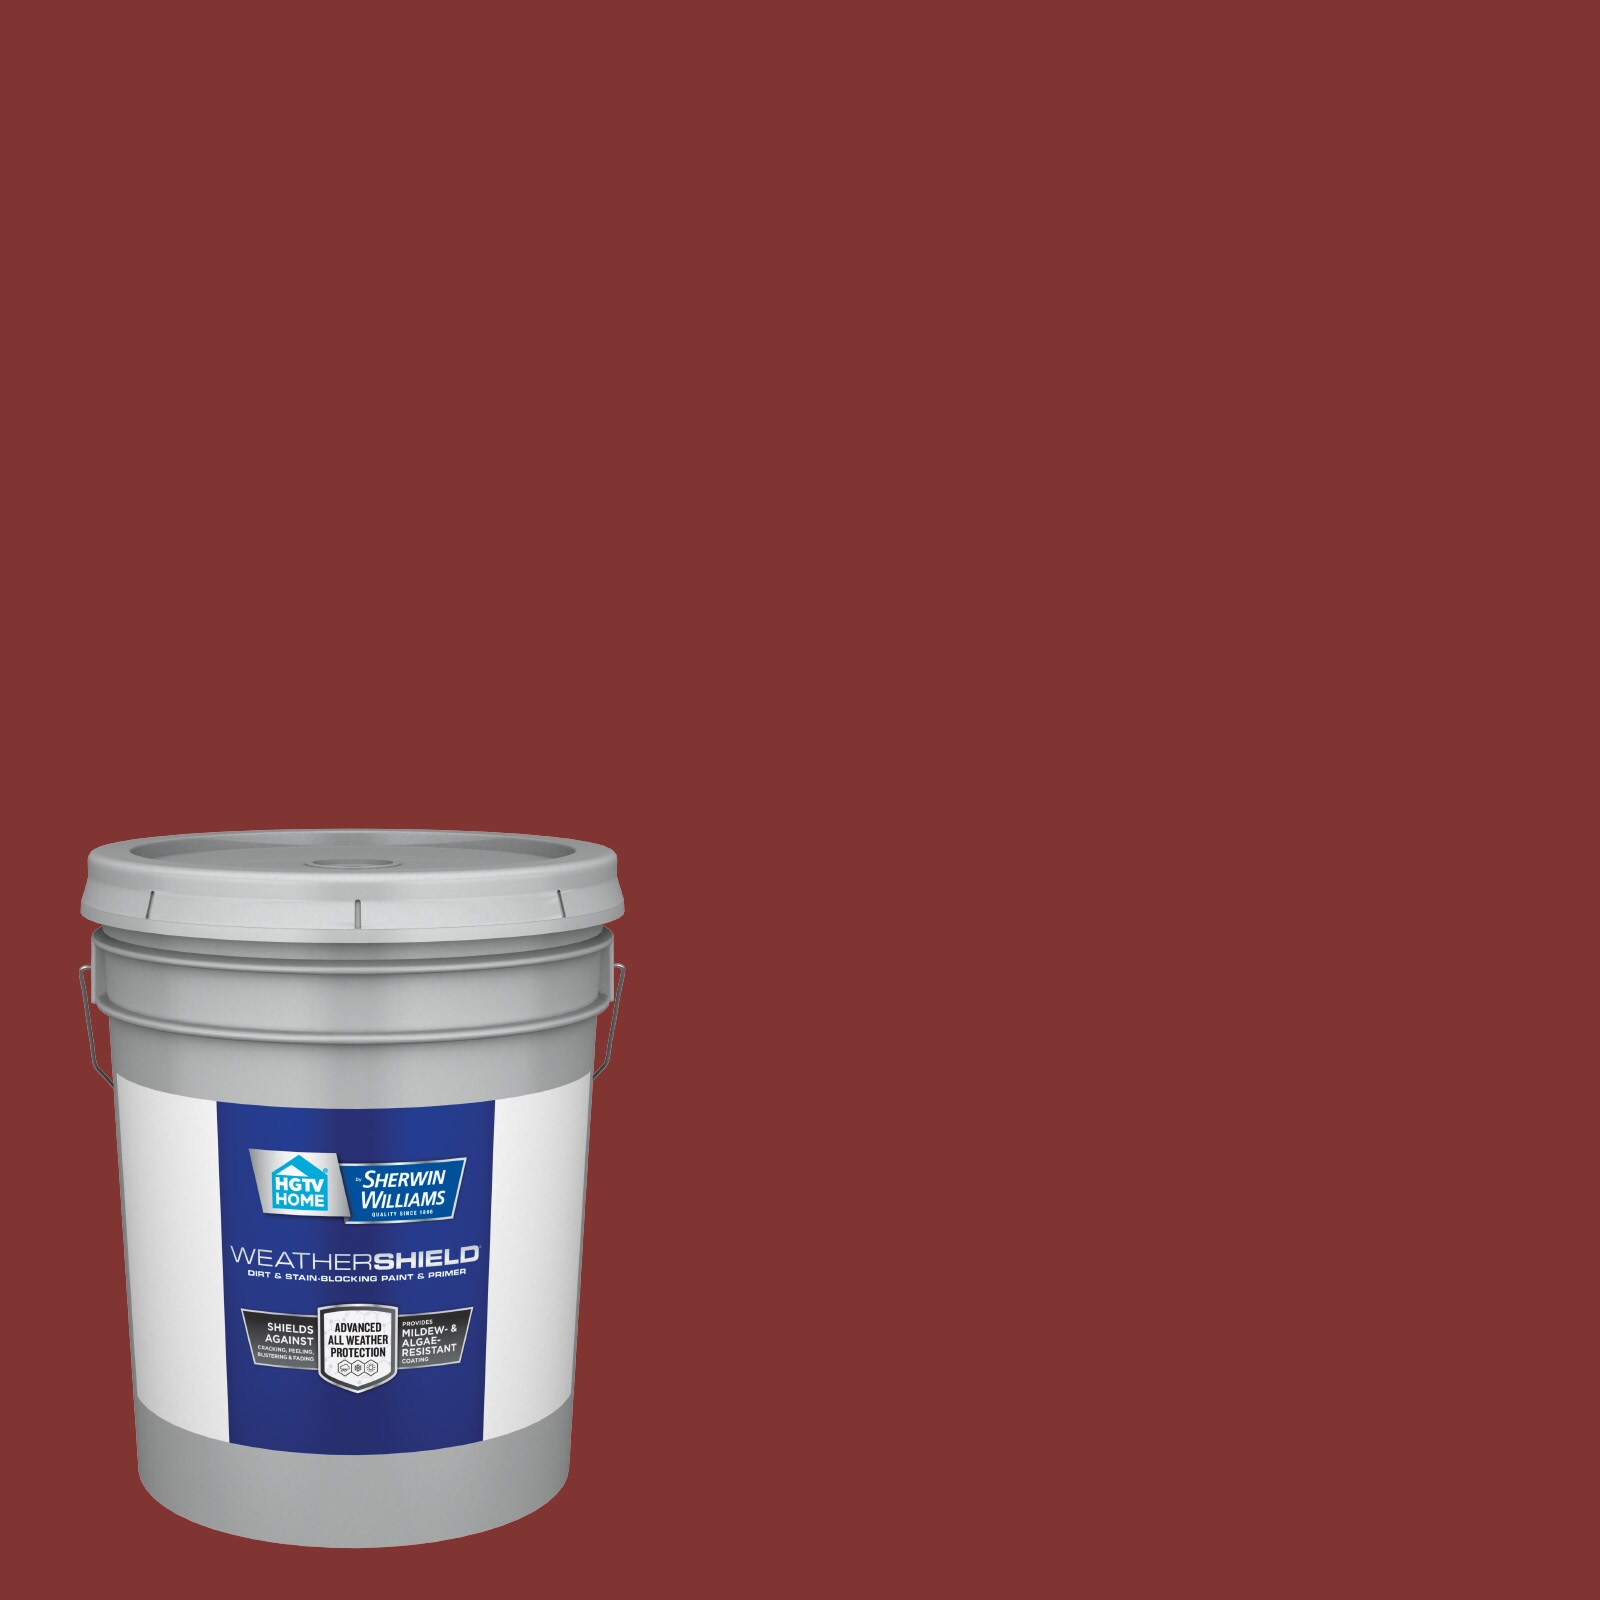 HGTV HOME by Sherwin-Williams 5-gallon Exterior Paint at Lowes.com